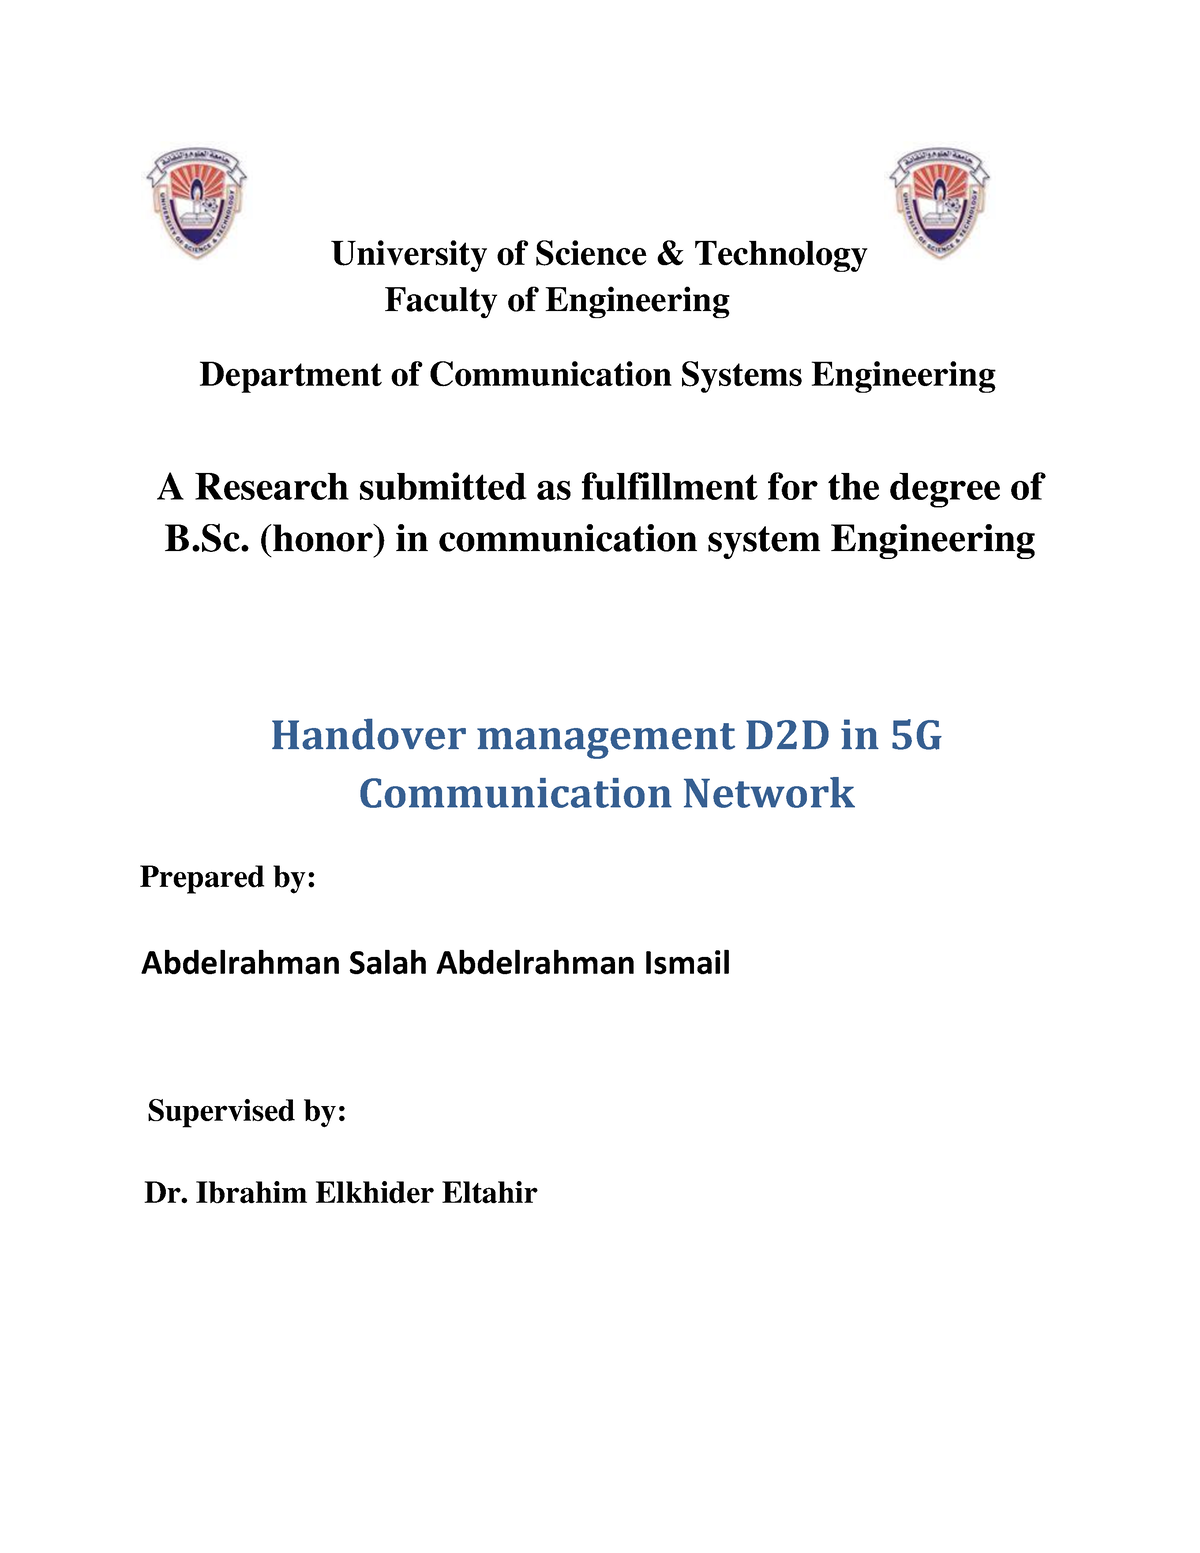 thesis on 5g